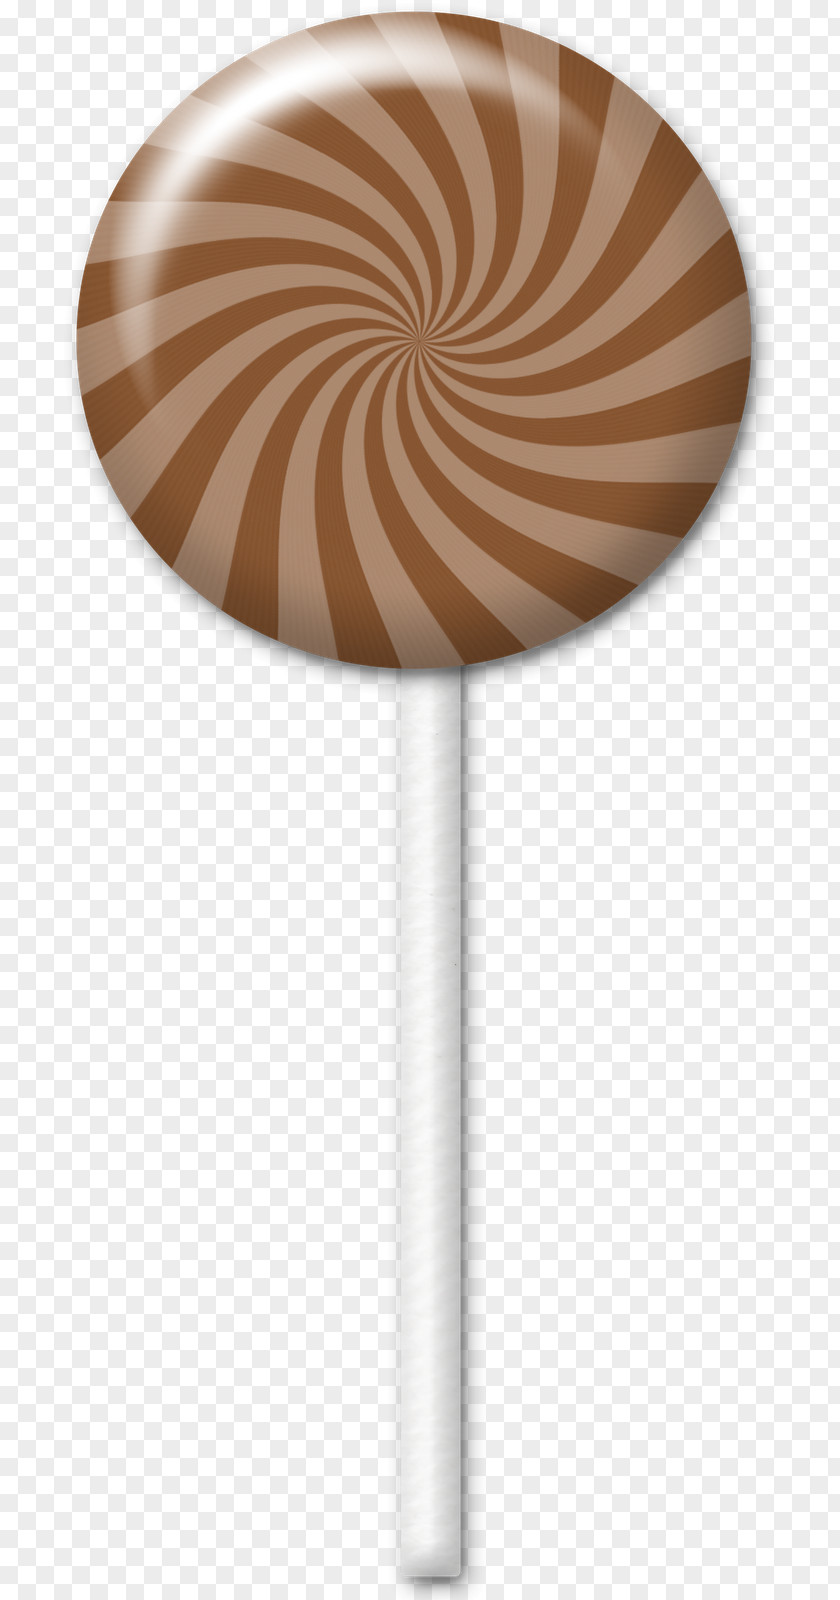 Candy Lollipop Cane Chocolate Ice Cream Frosting & Icing PNG